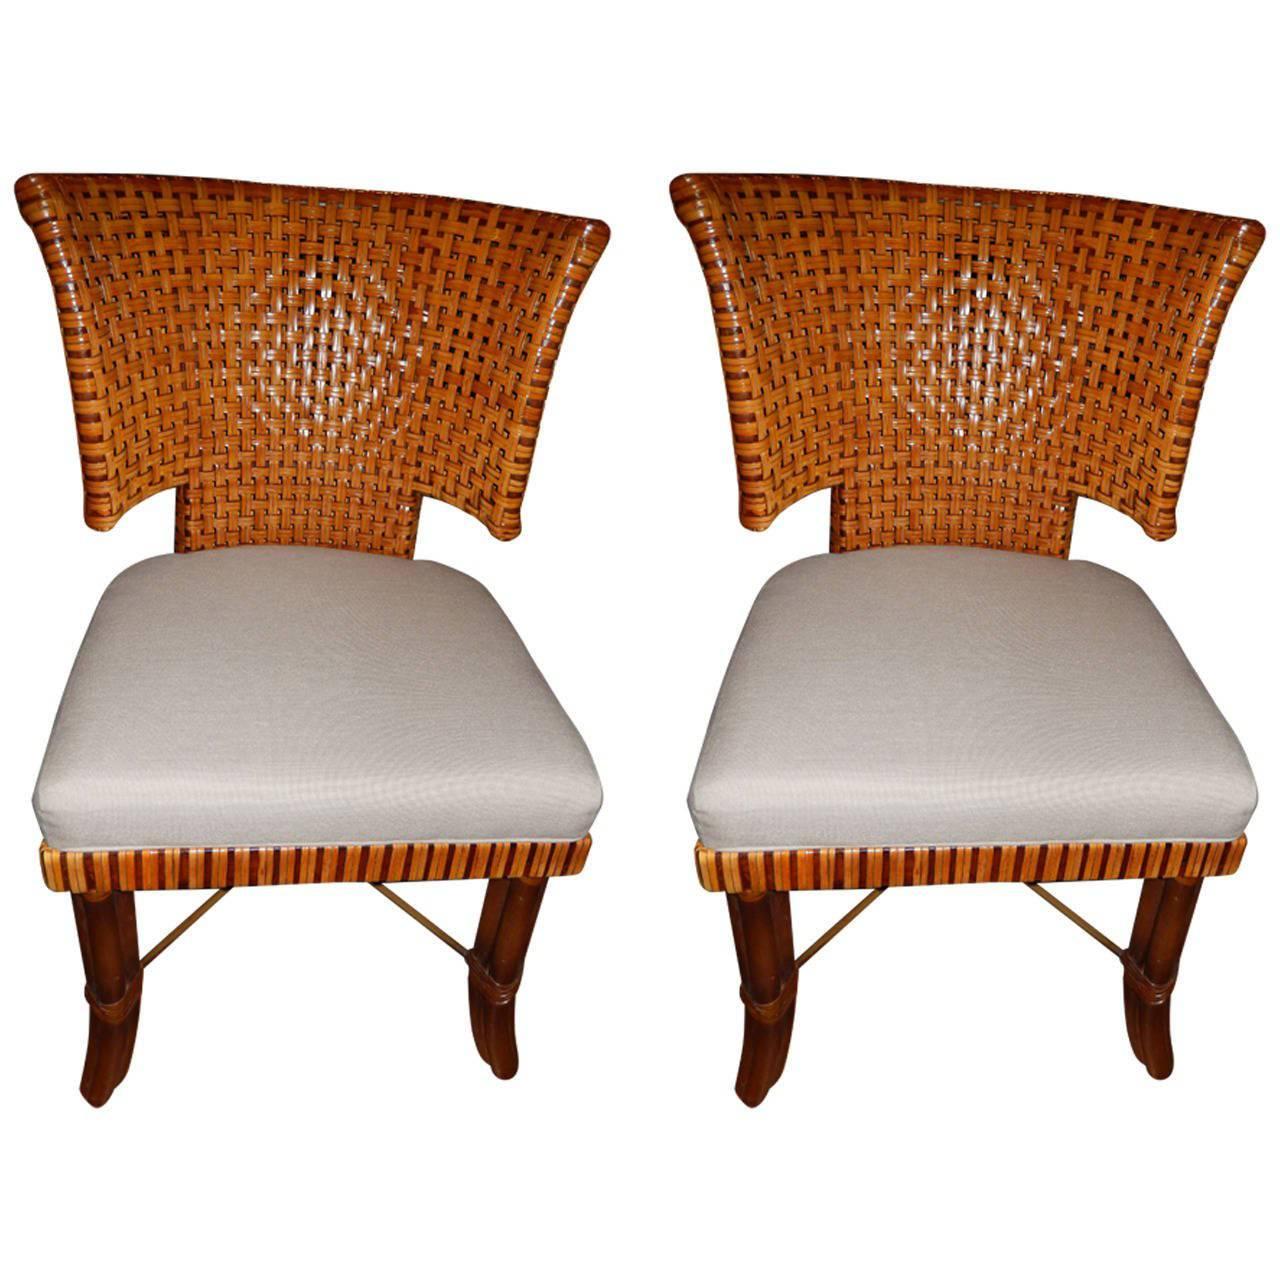 Pair of Danish Modern Handwoven Leather Dining Room Chairs